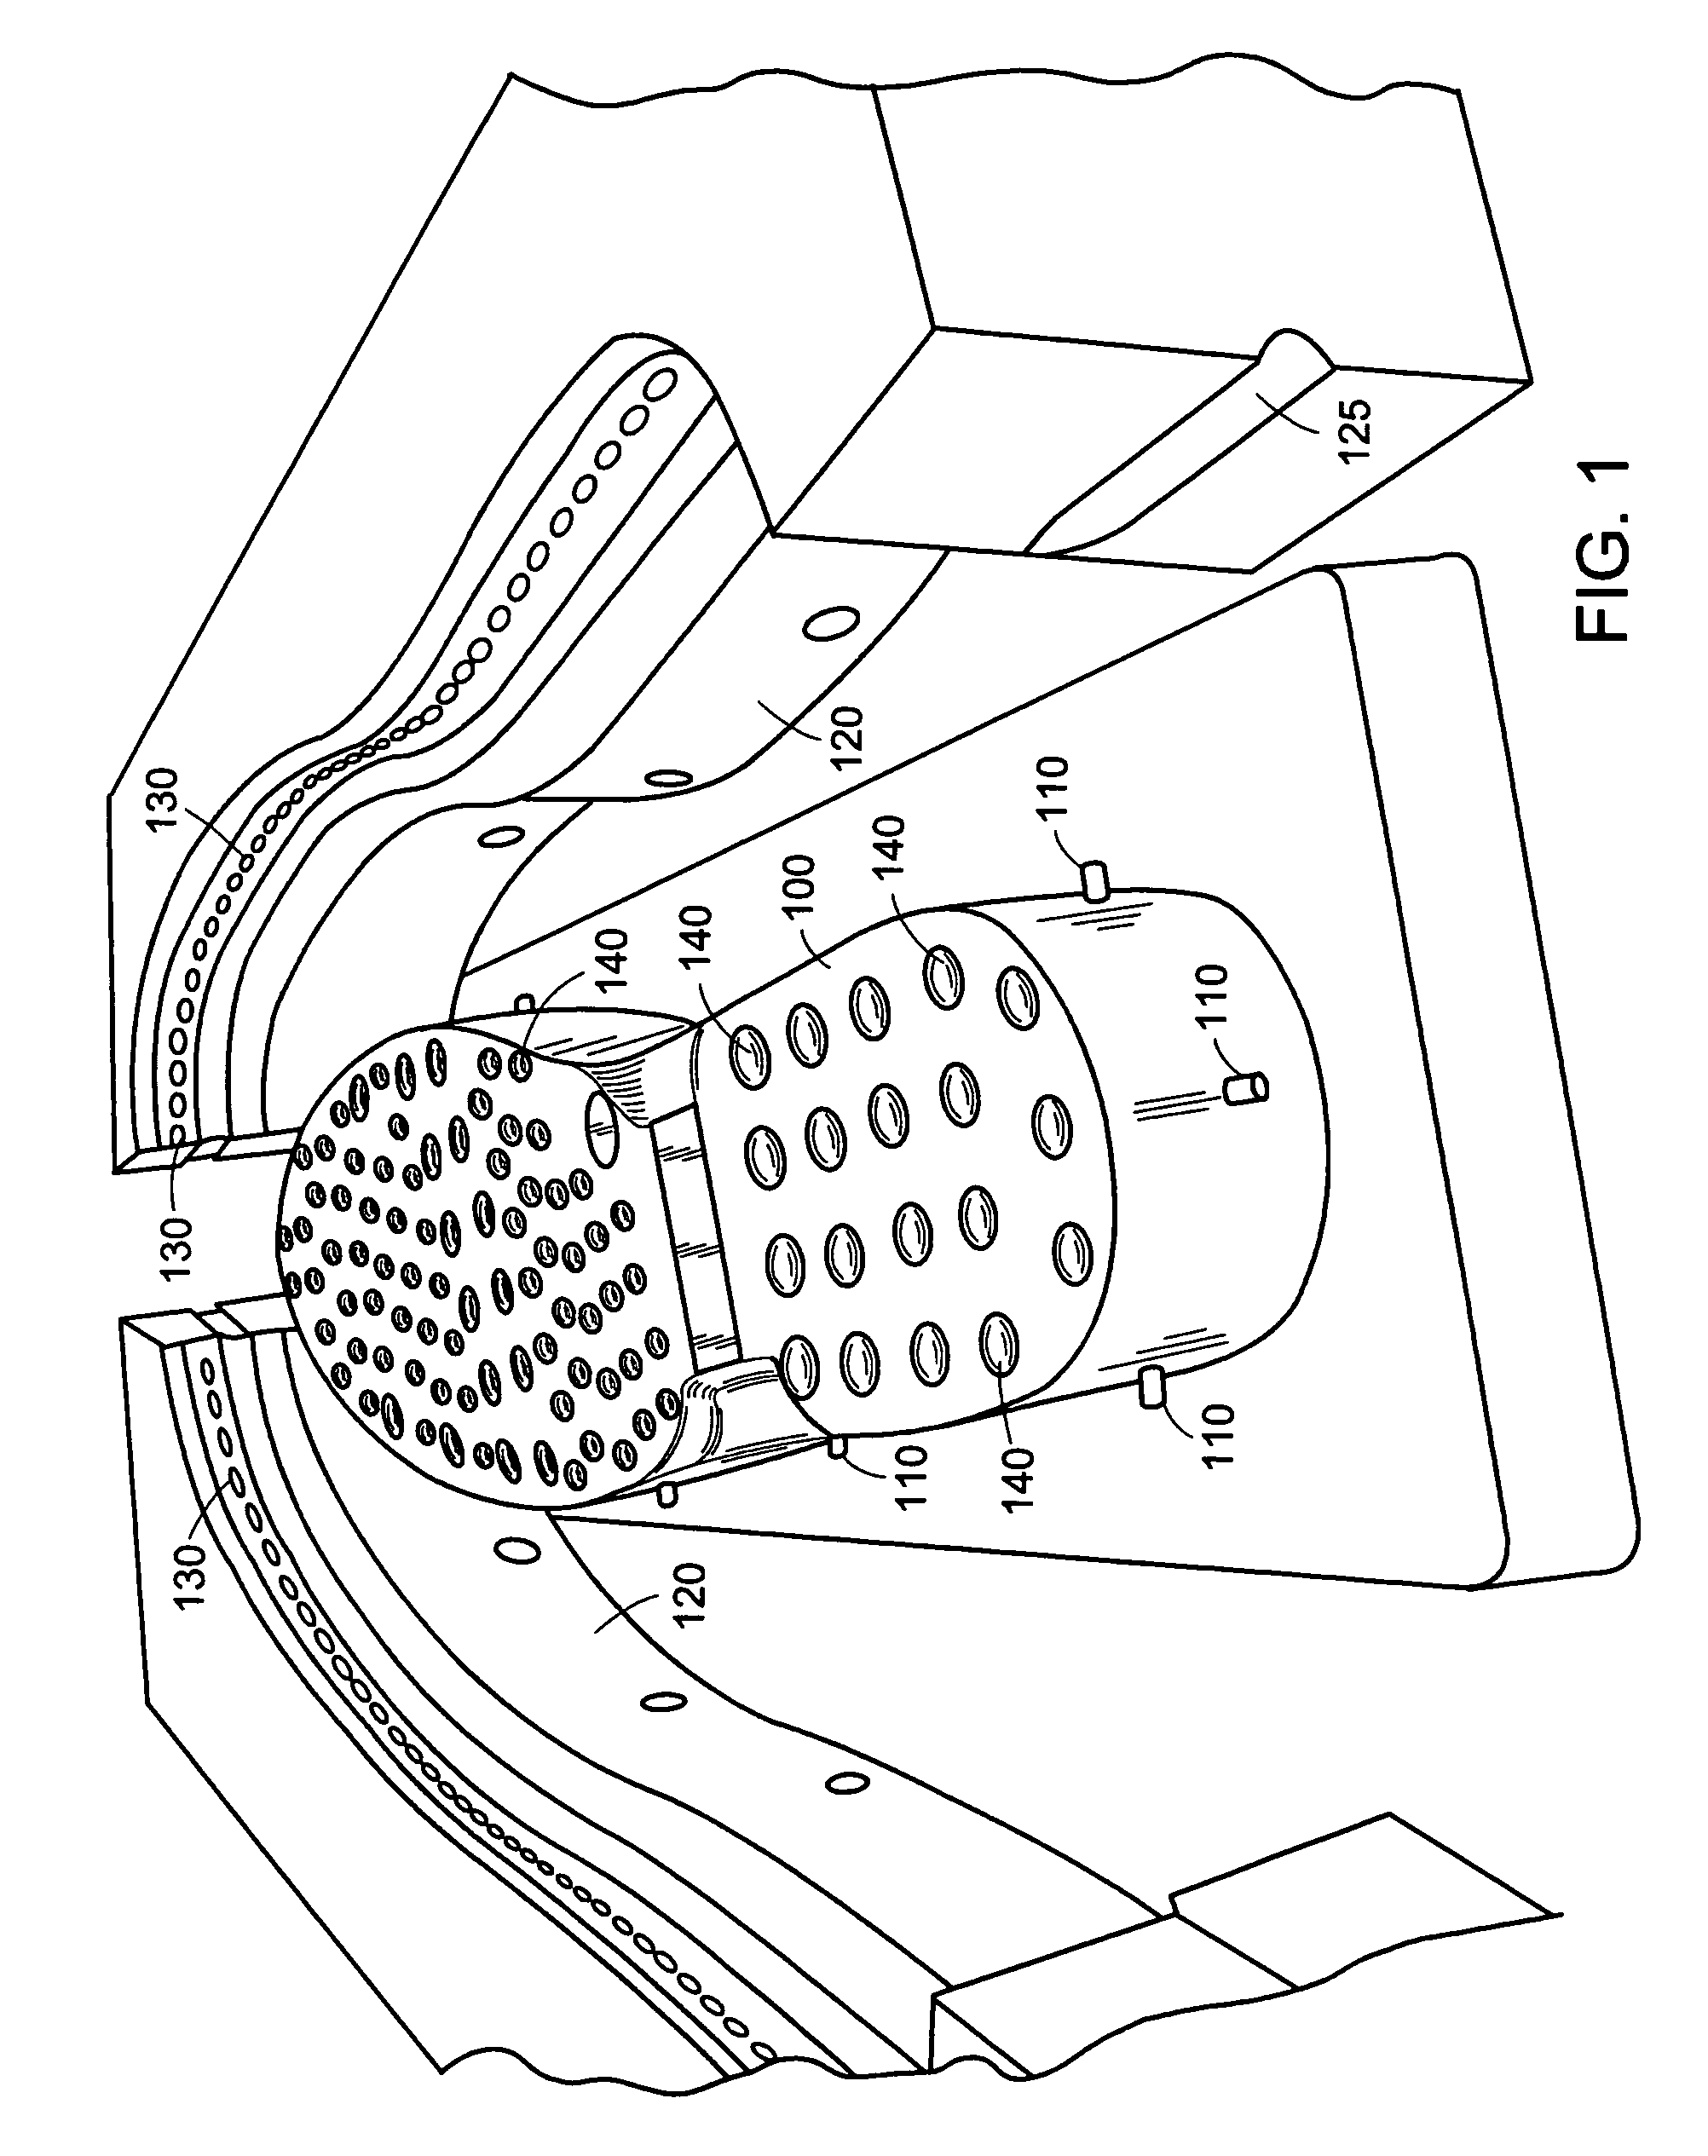 Injection-molded footwear having a textile-layered outer sole